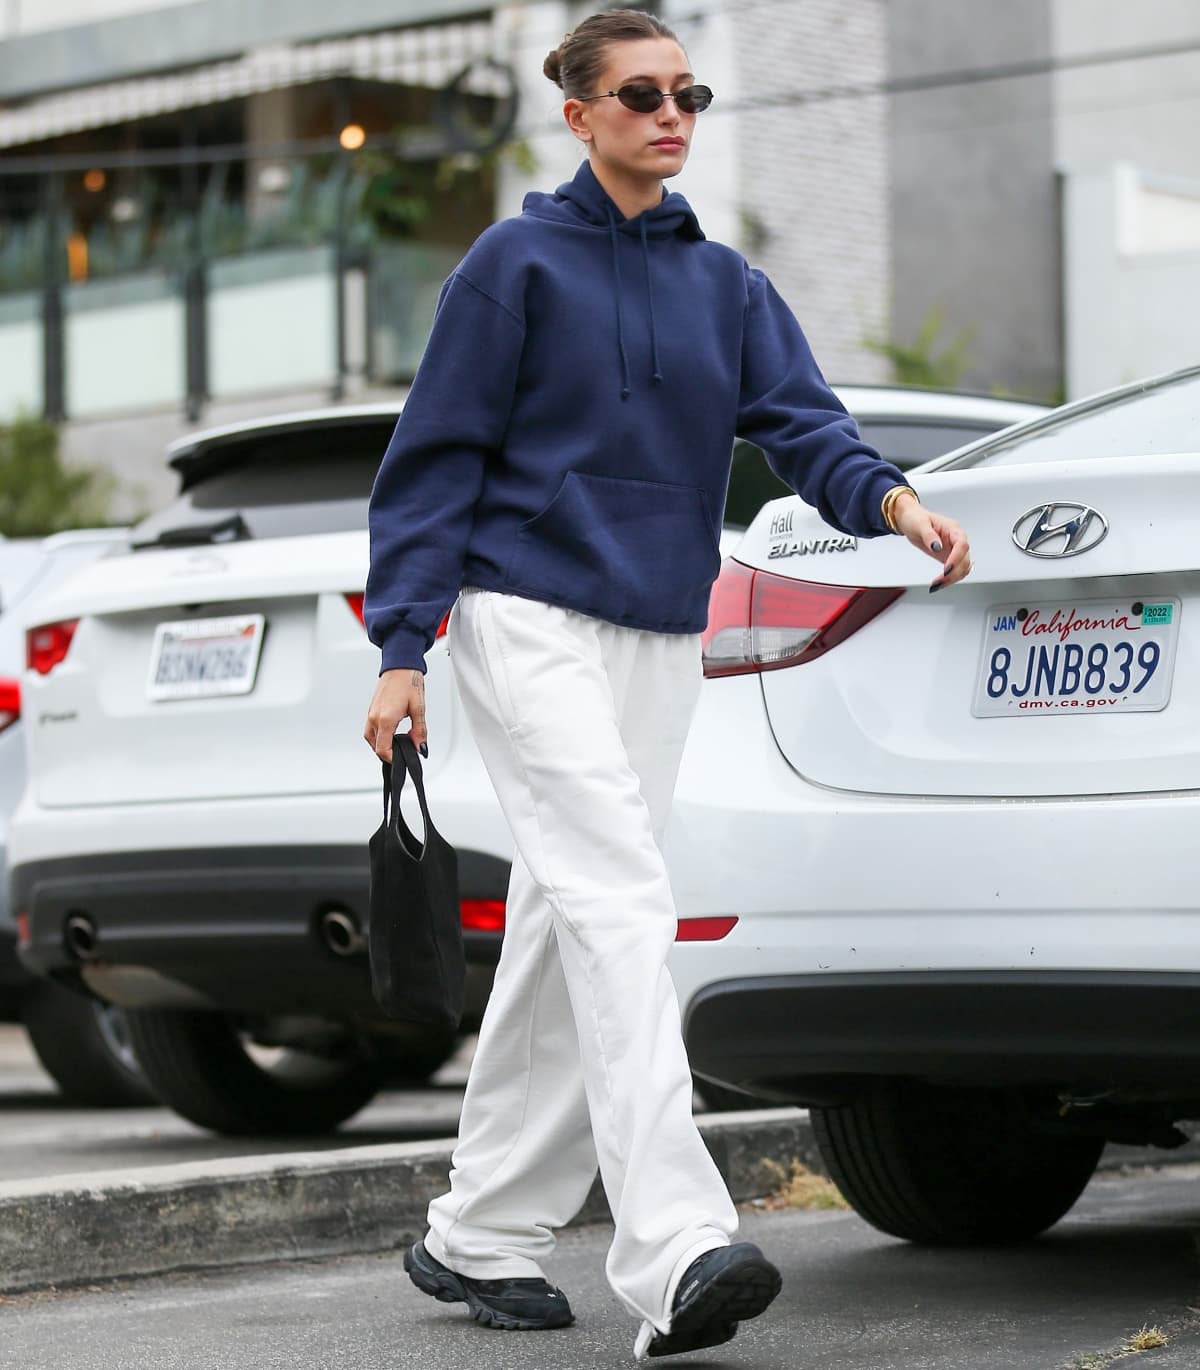 Looking comfy in a blue hooded sweater, white pants, and black sneakers, Hailey Bieber heads to a Pilates class